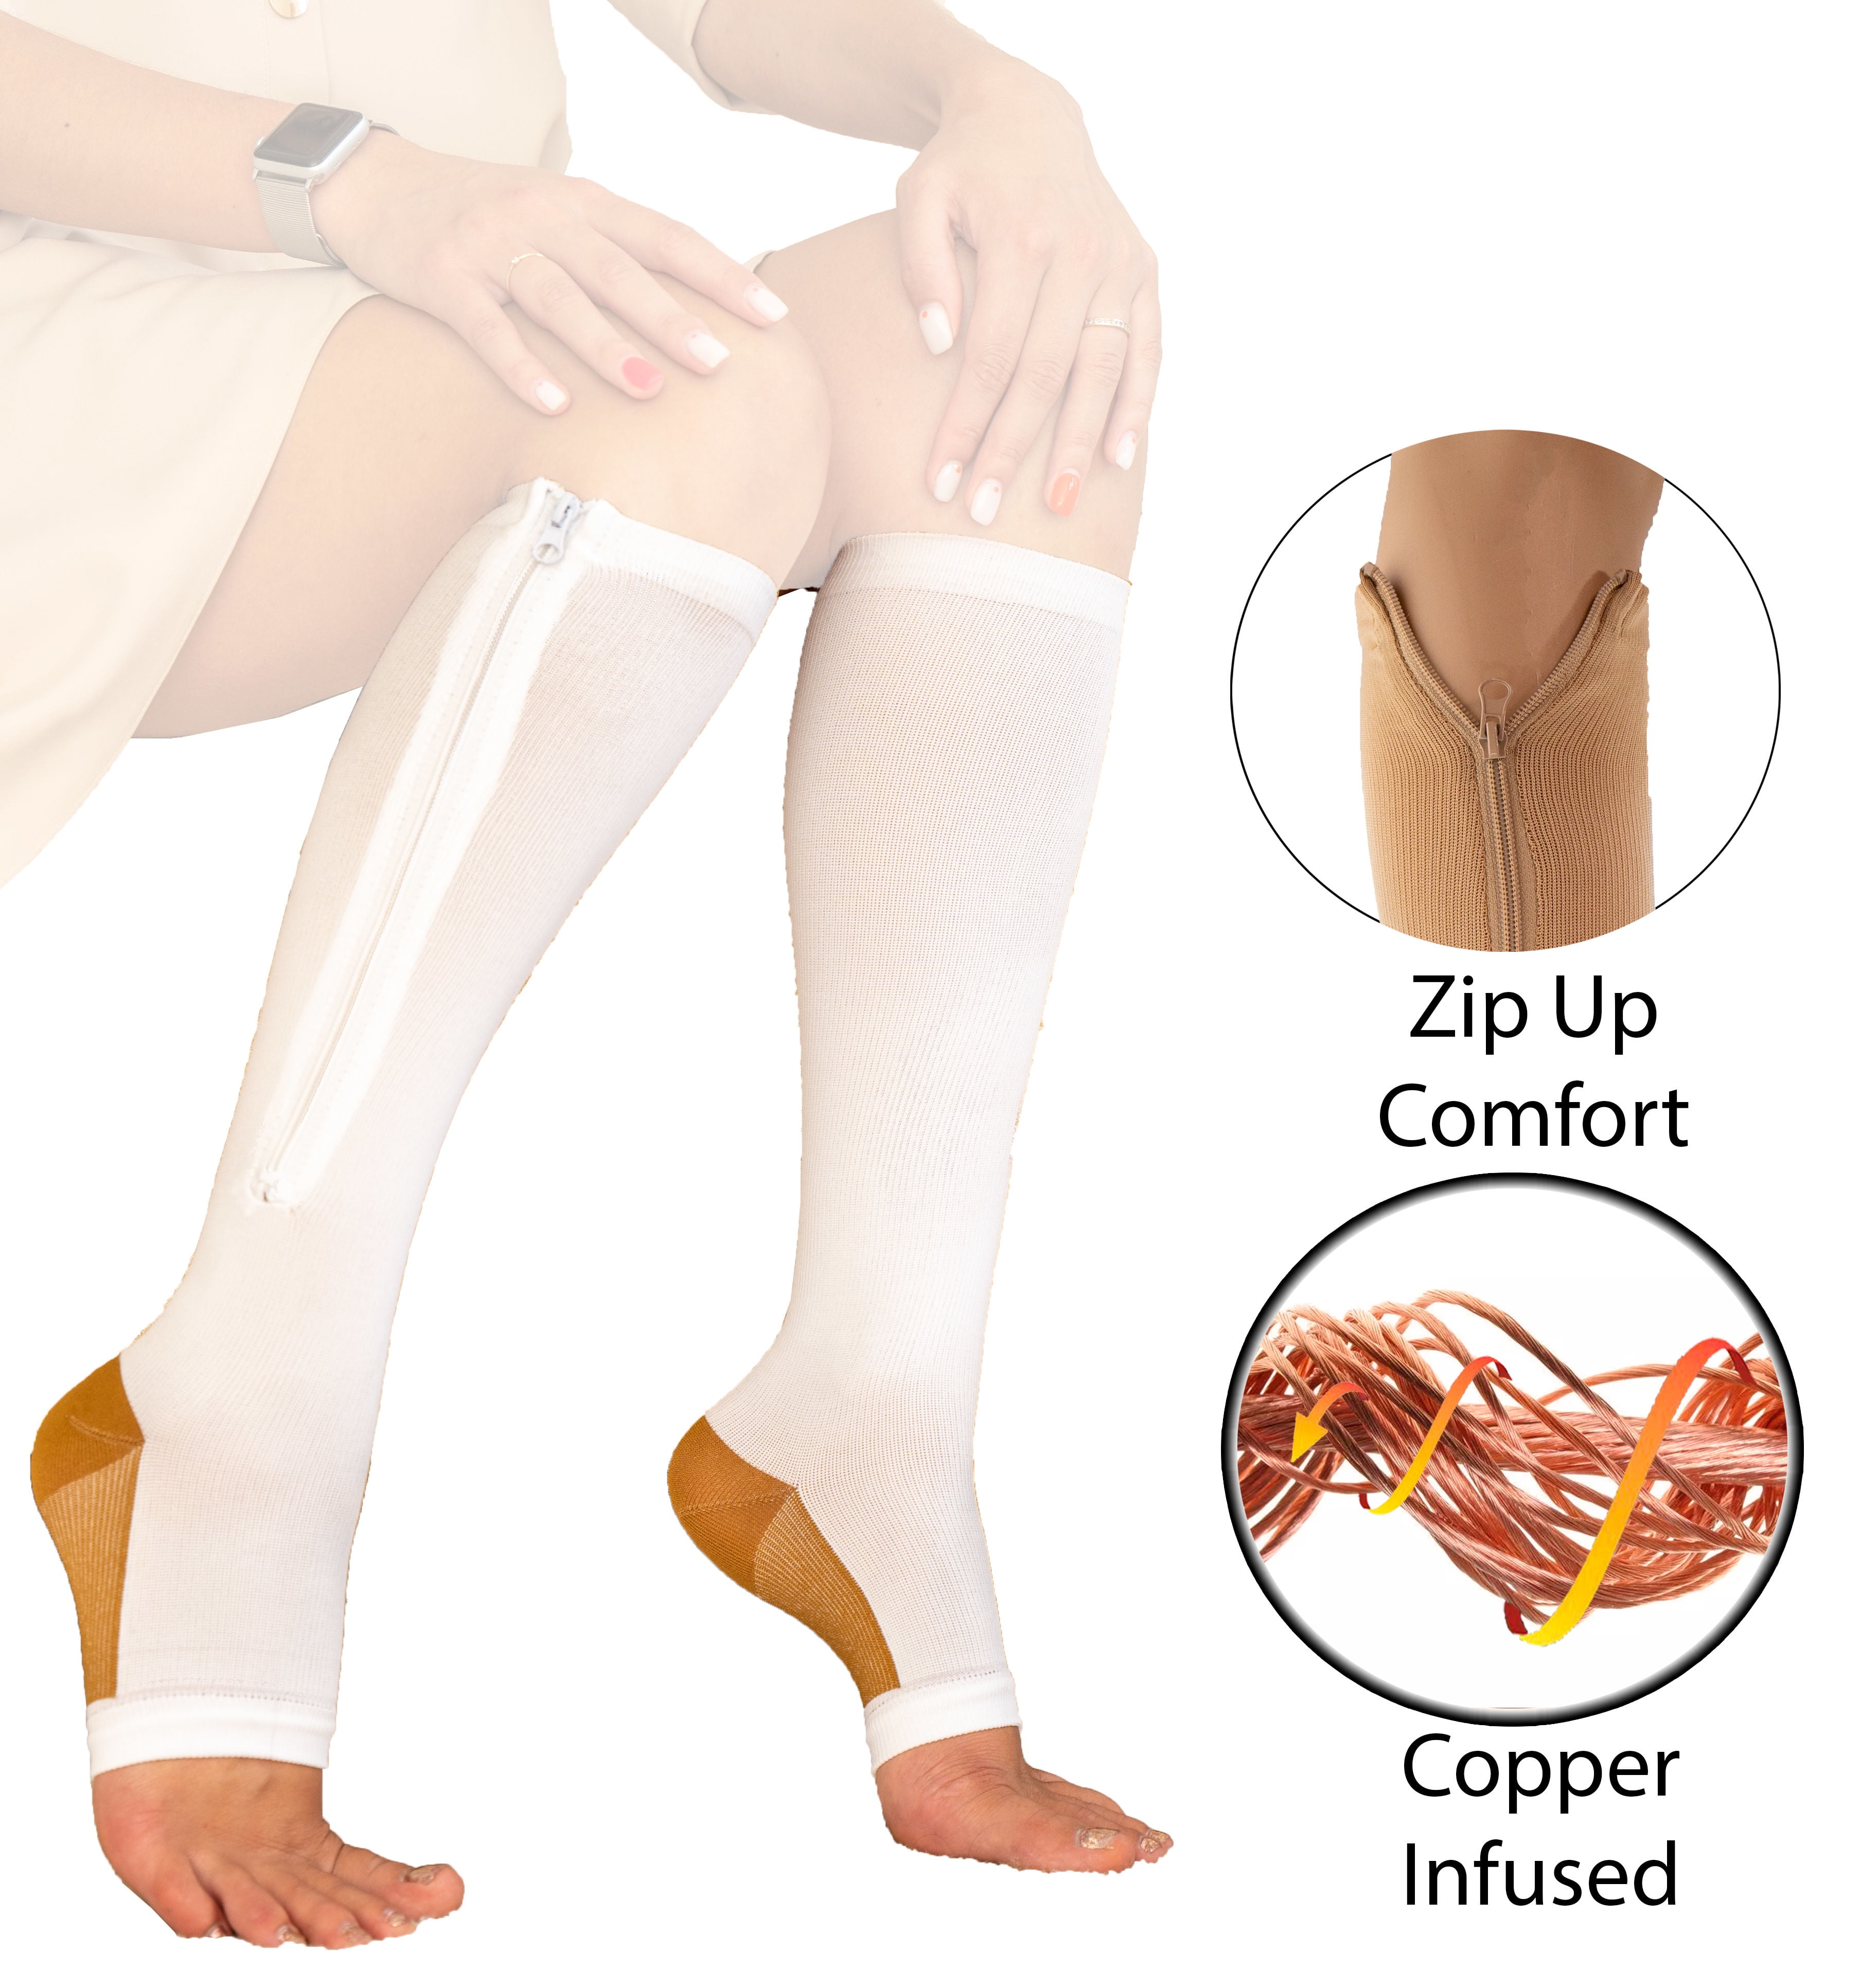 Copper Zipper Compression Socks w/ Open Toe Knee High Support Stockings -  Soft, Breathable Compression Socks For Support, Reduce Swelling & Better  Circulation - Grey Medium 